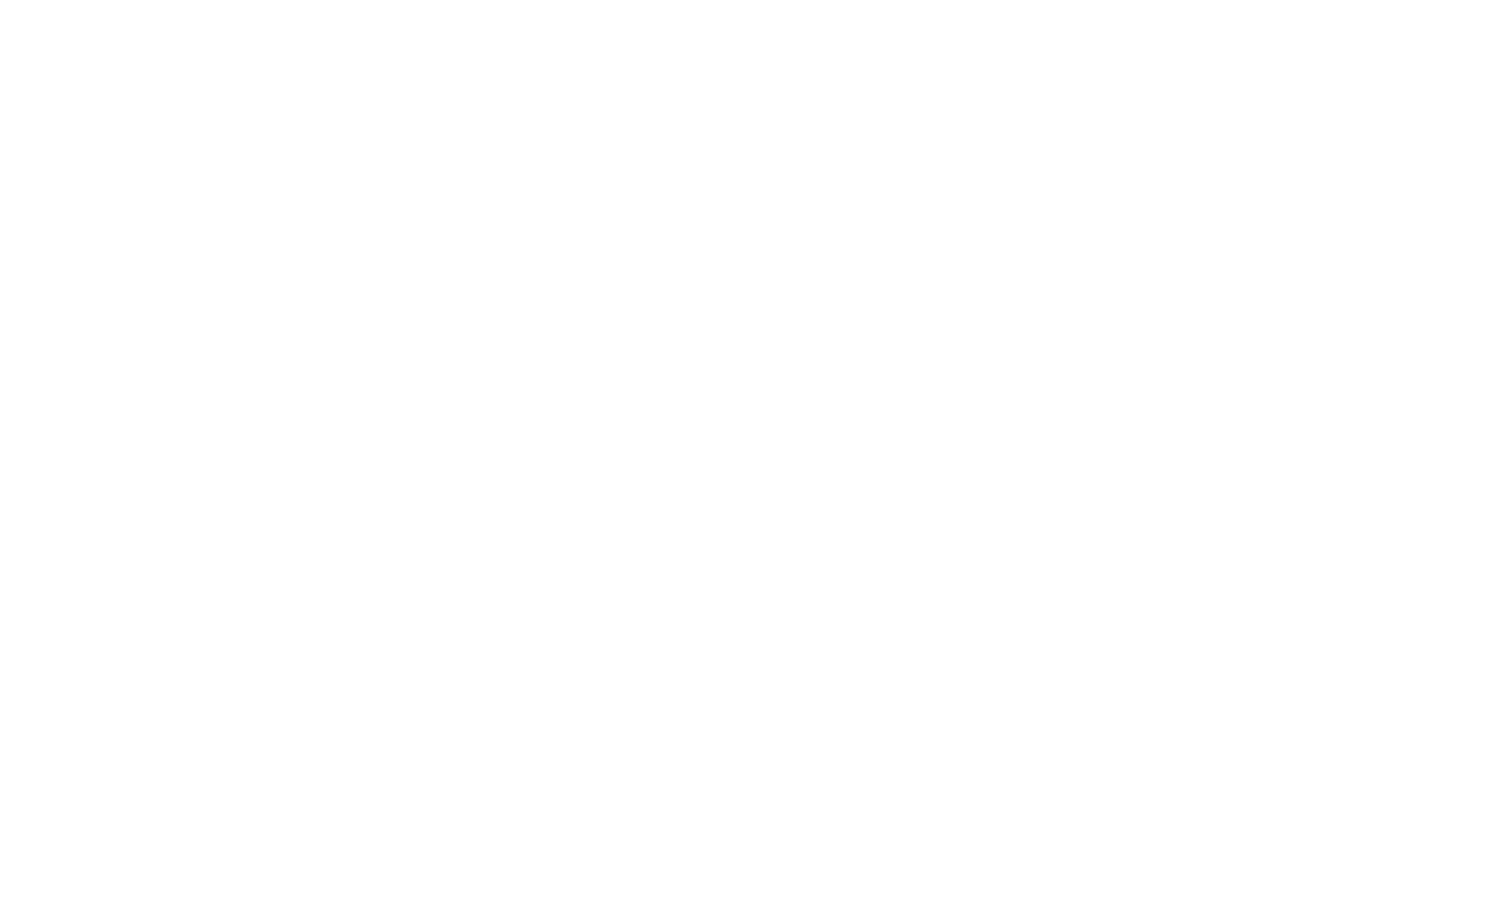 GEOX logo in transparent PNG and SVG formats